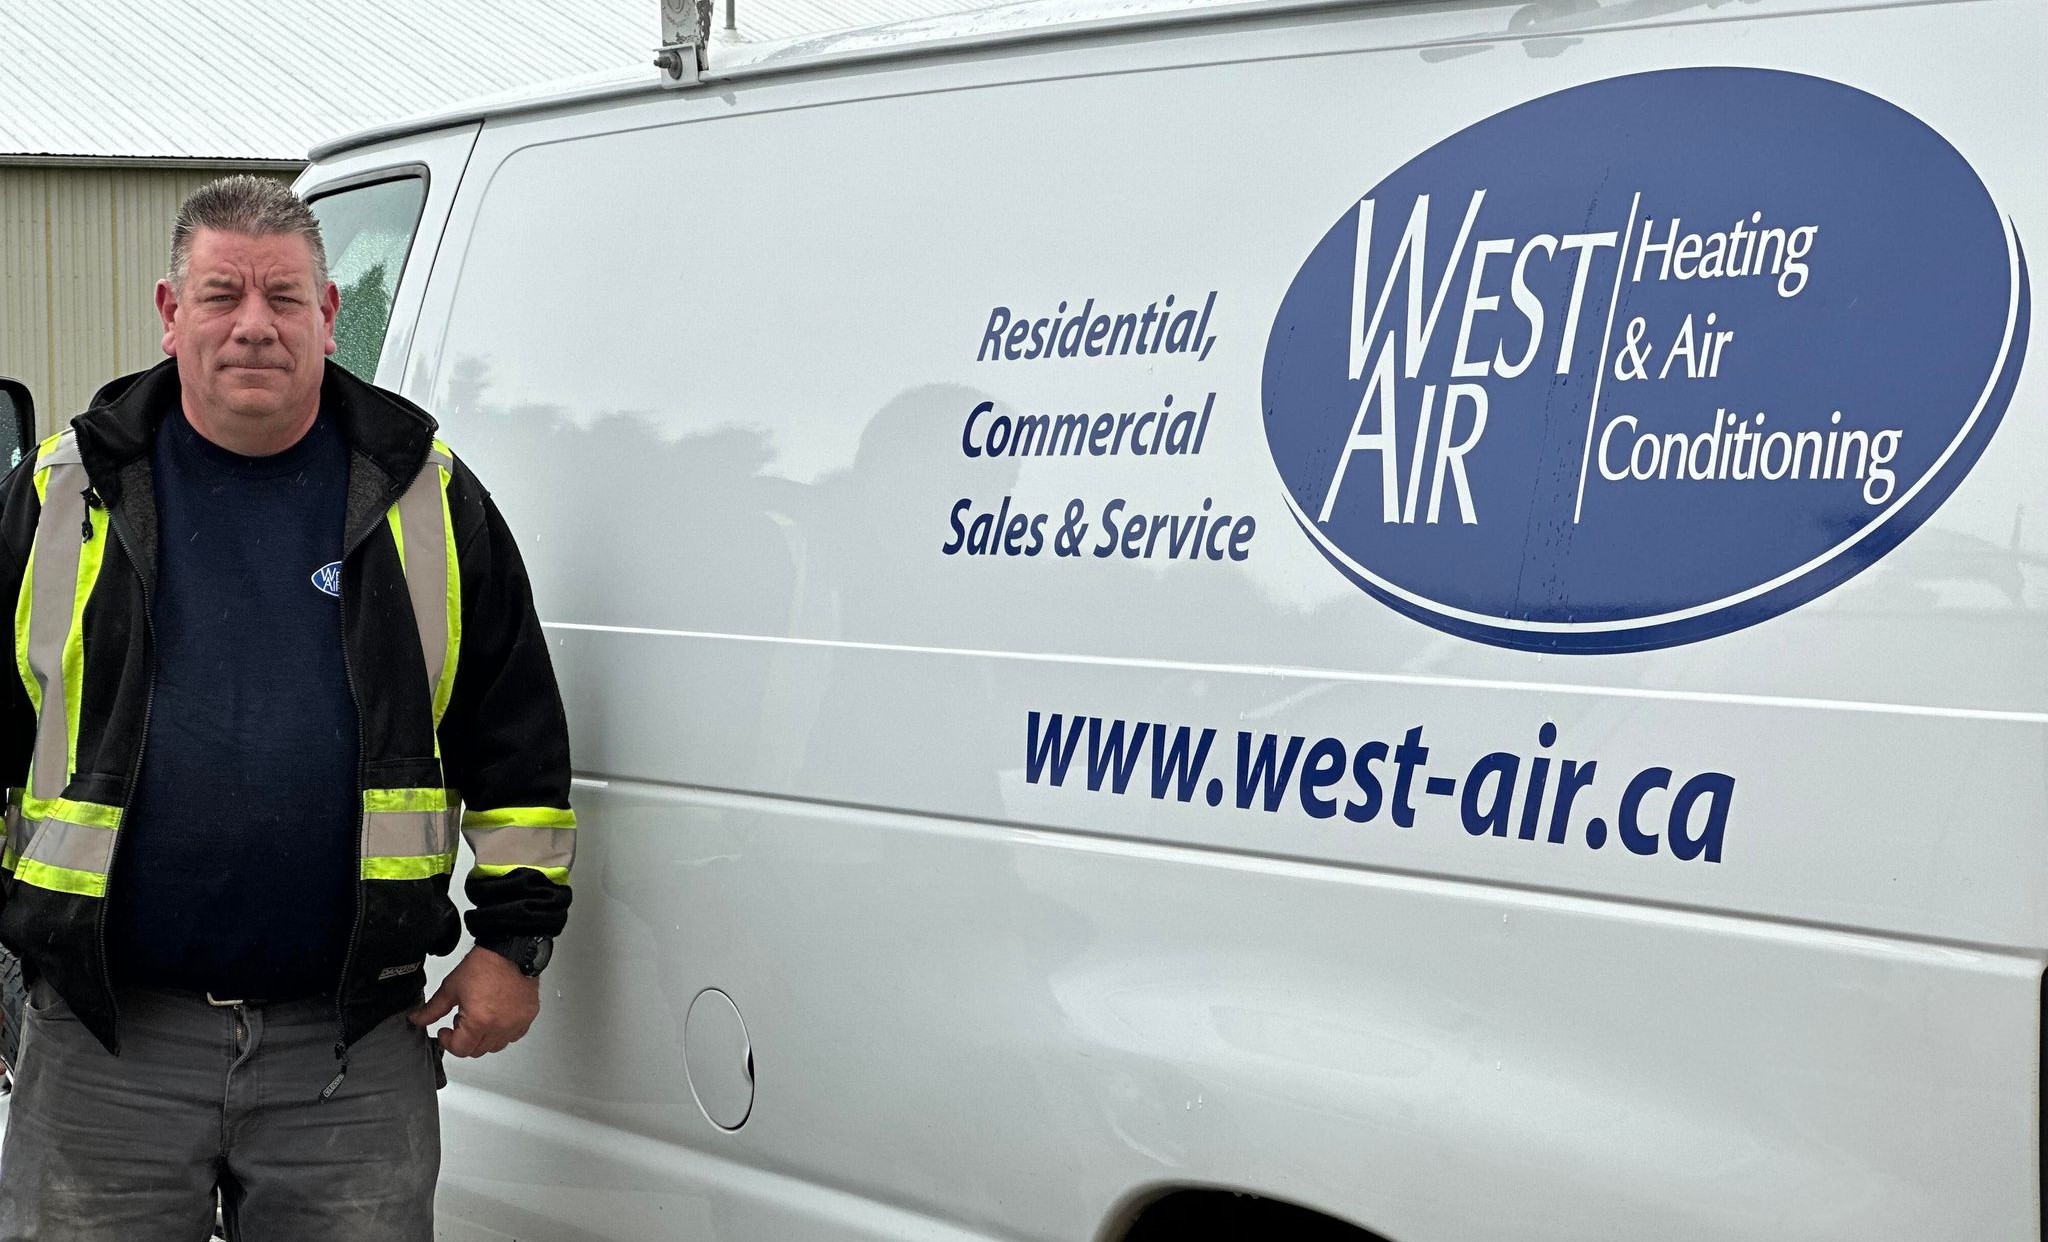 West Air Heating & Air Conditioning specializes in heating, cooling, duct work and more